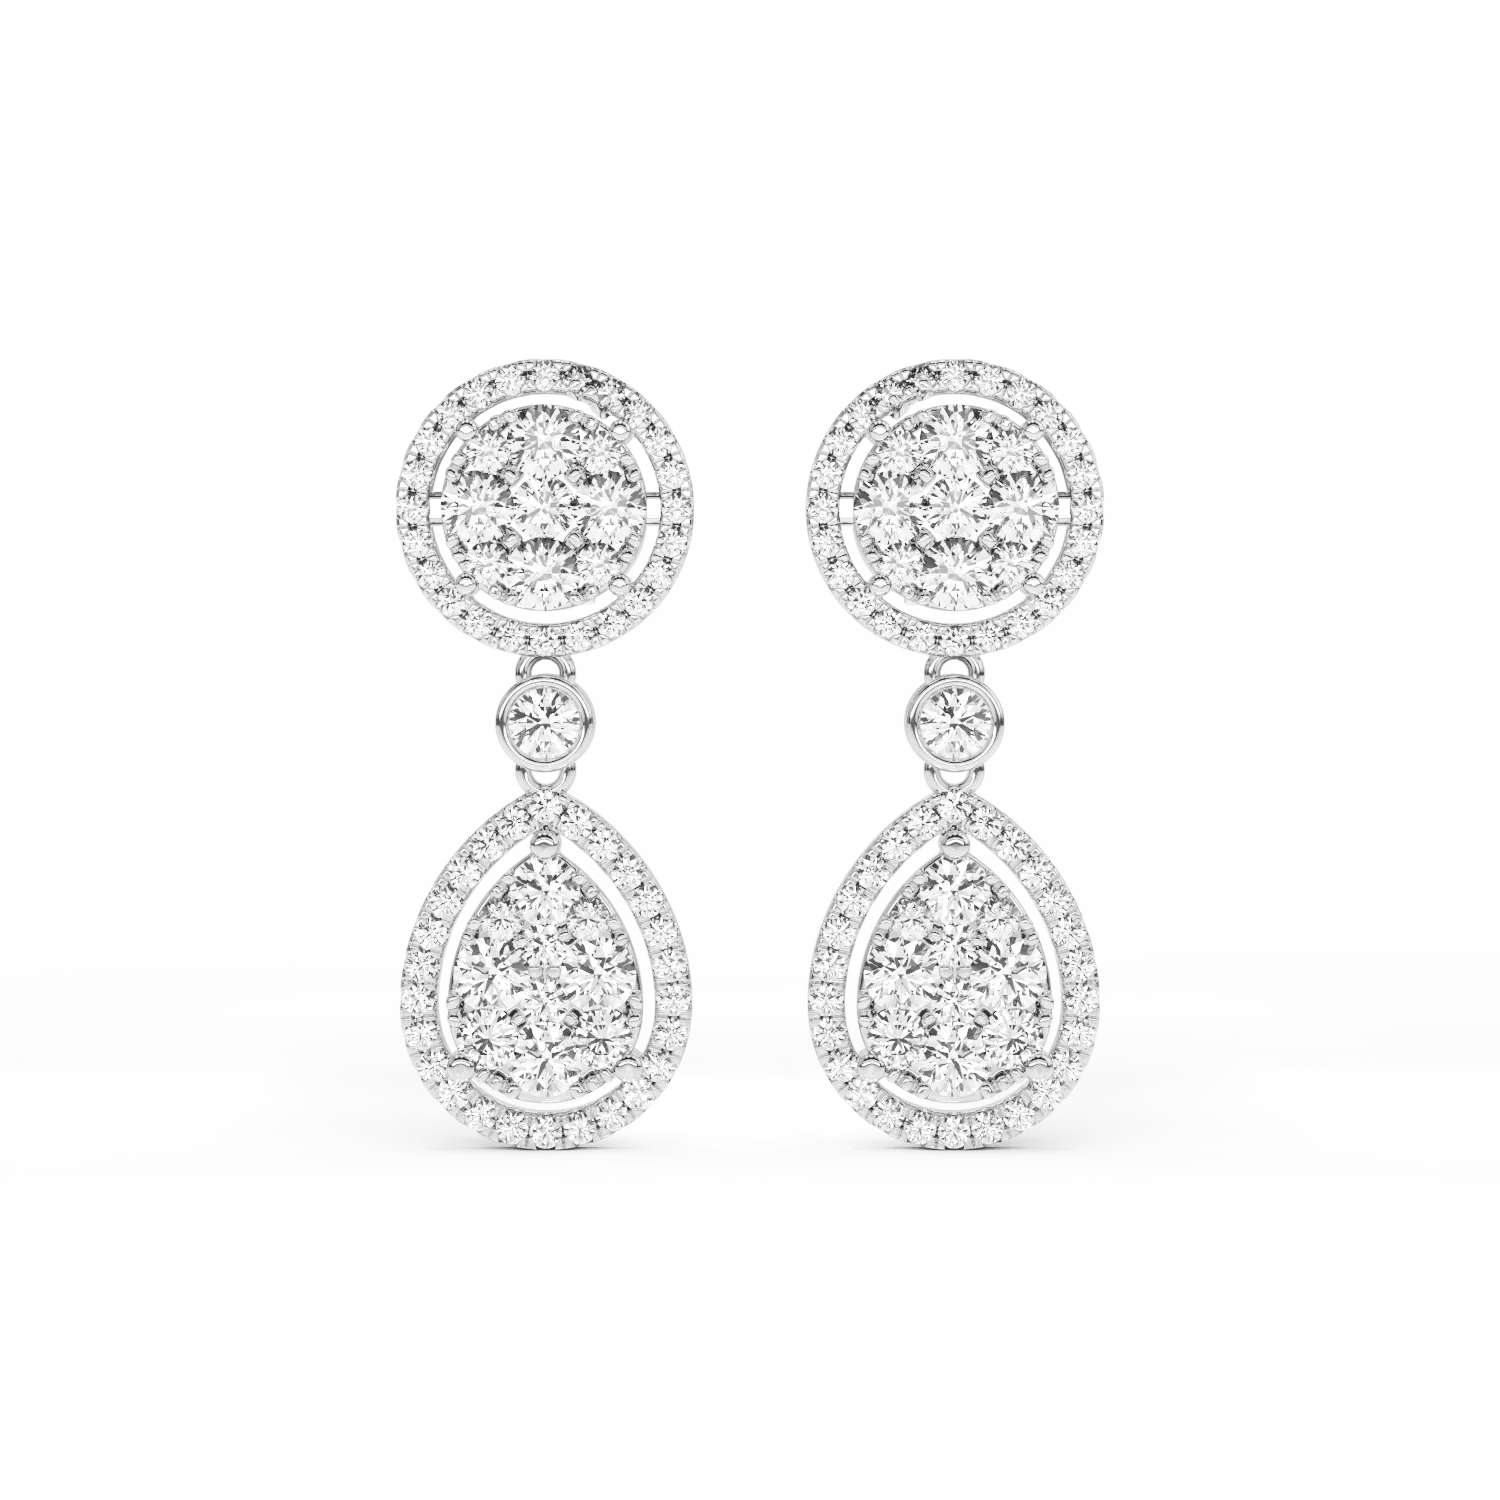 18K white gold earrings with 2.34ct diamonds